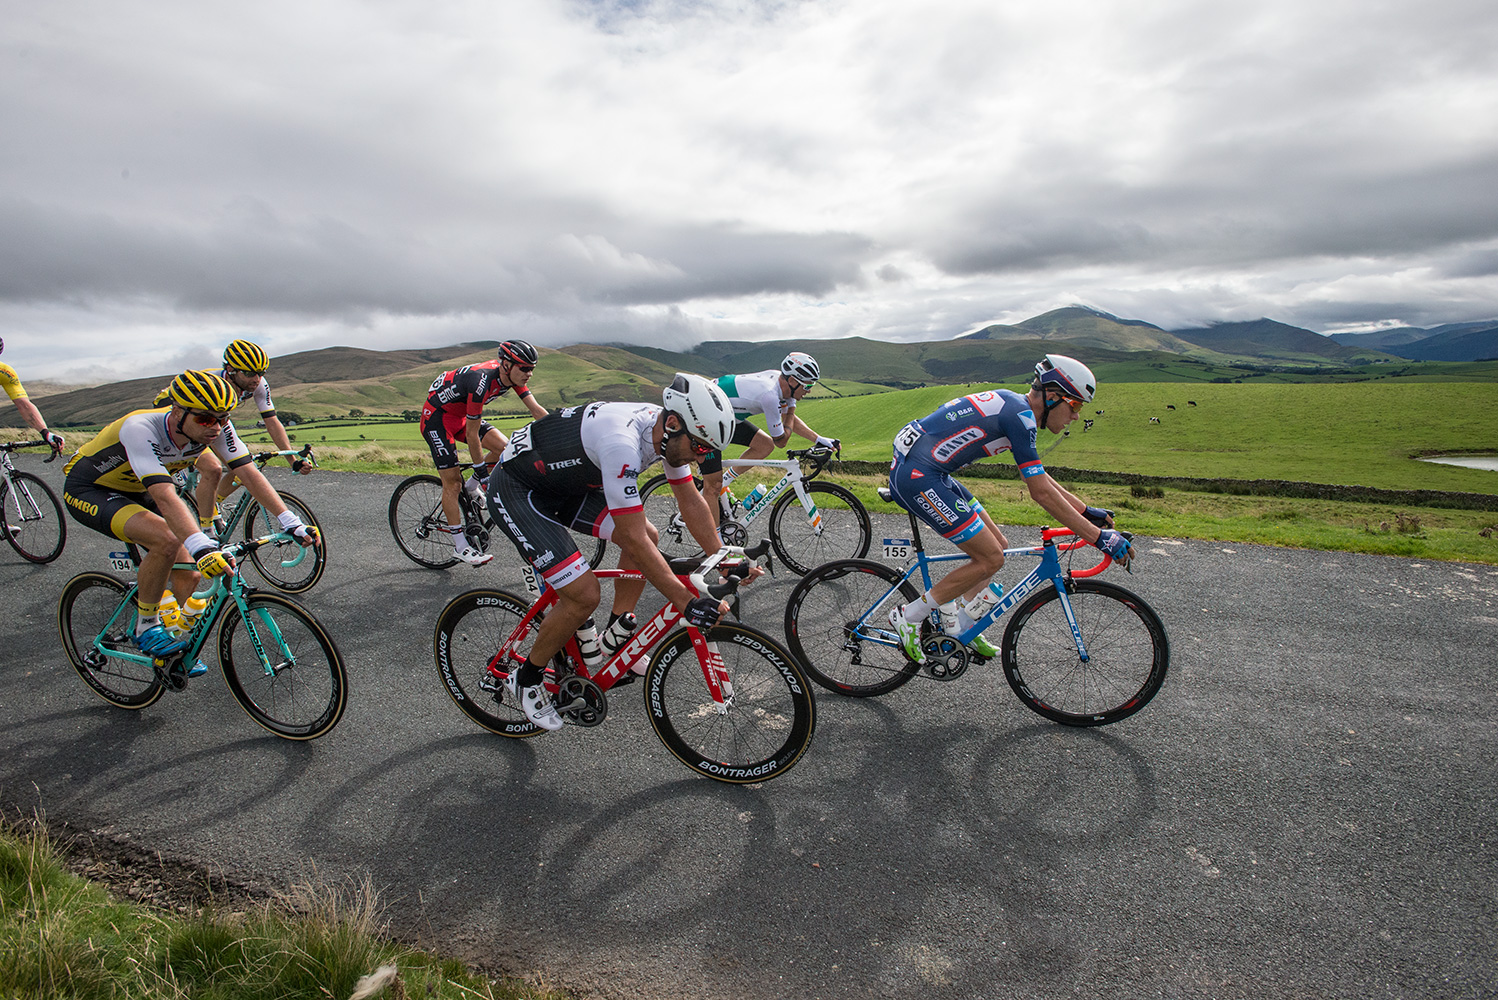  Xandro MEURISSE of Belgium leads the breakaway group over Caldbeck Commons in Cumbria on Stage 2